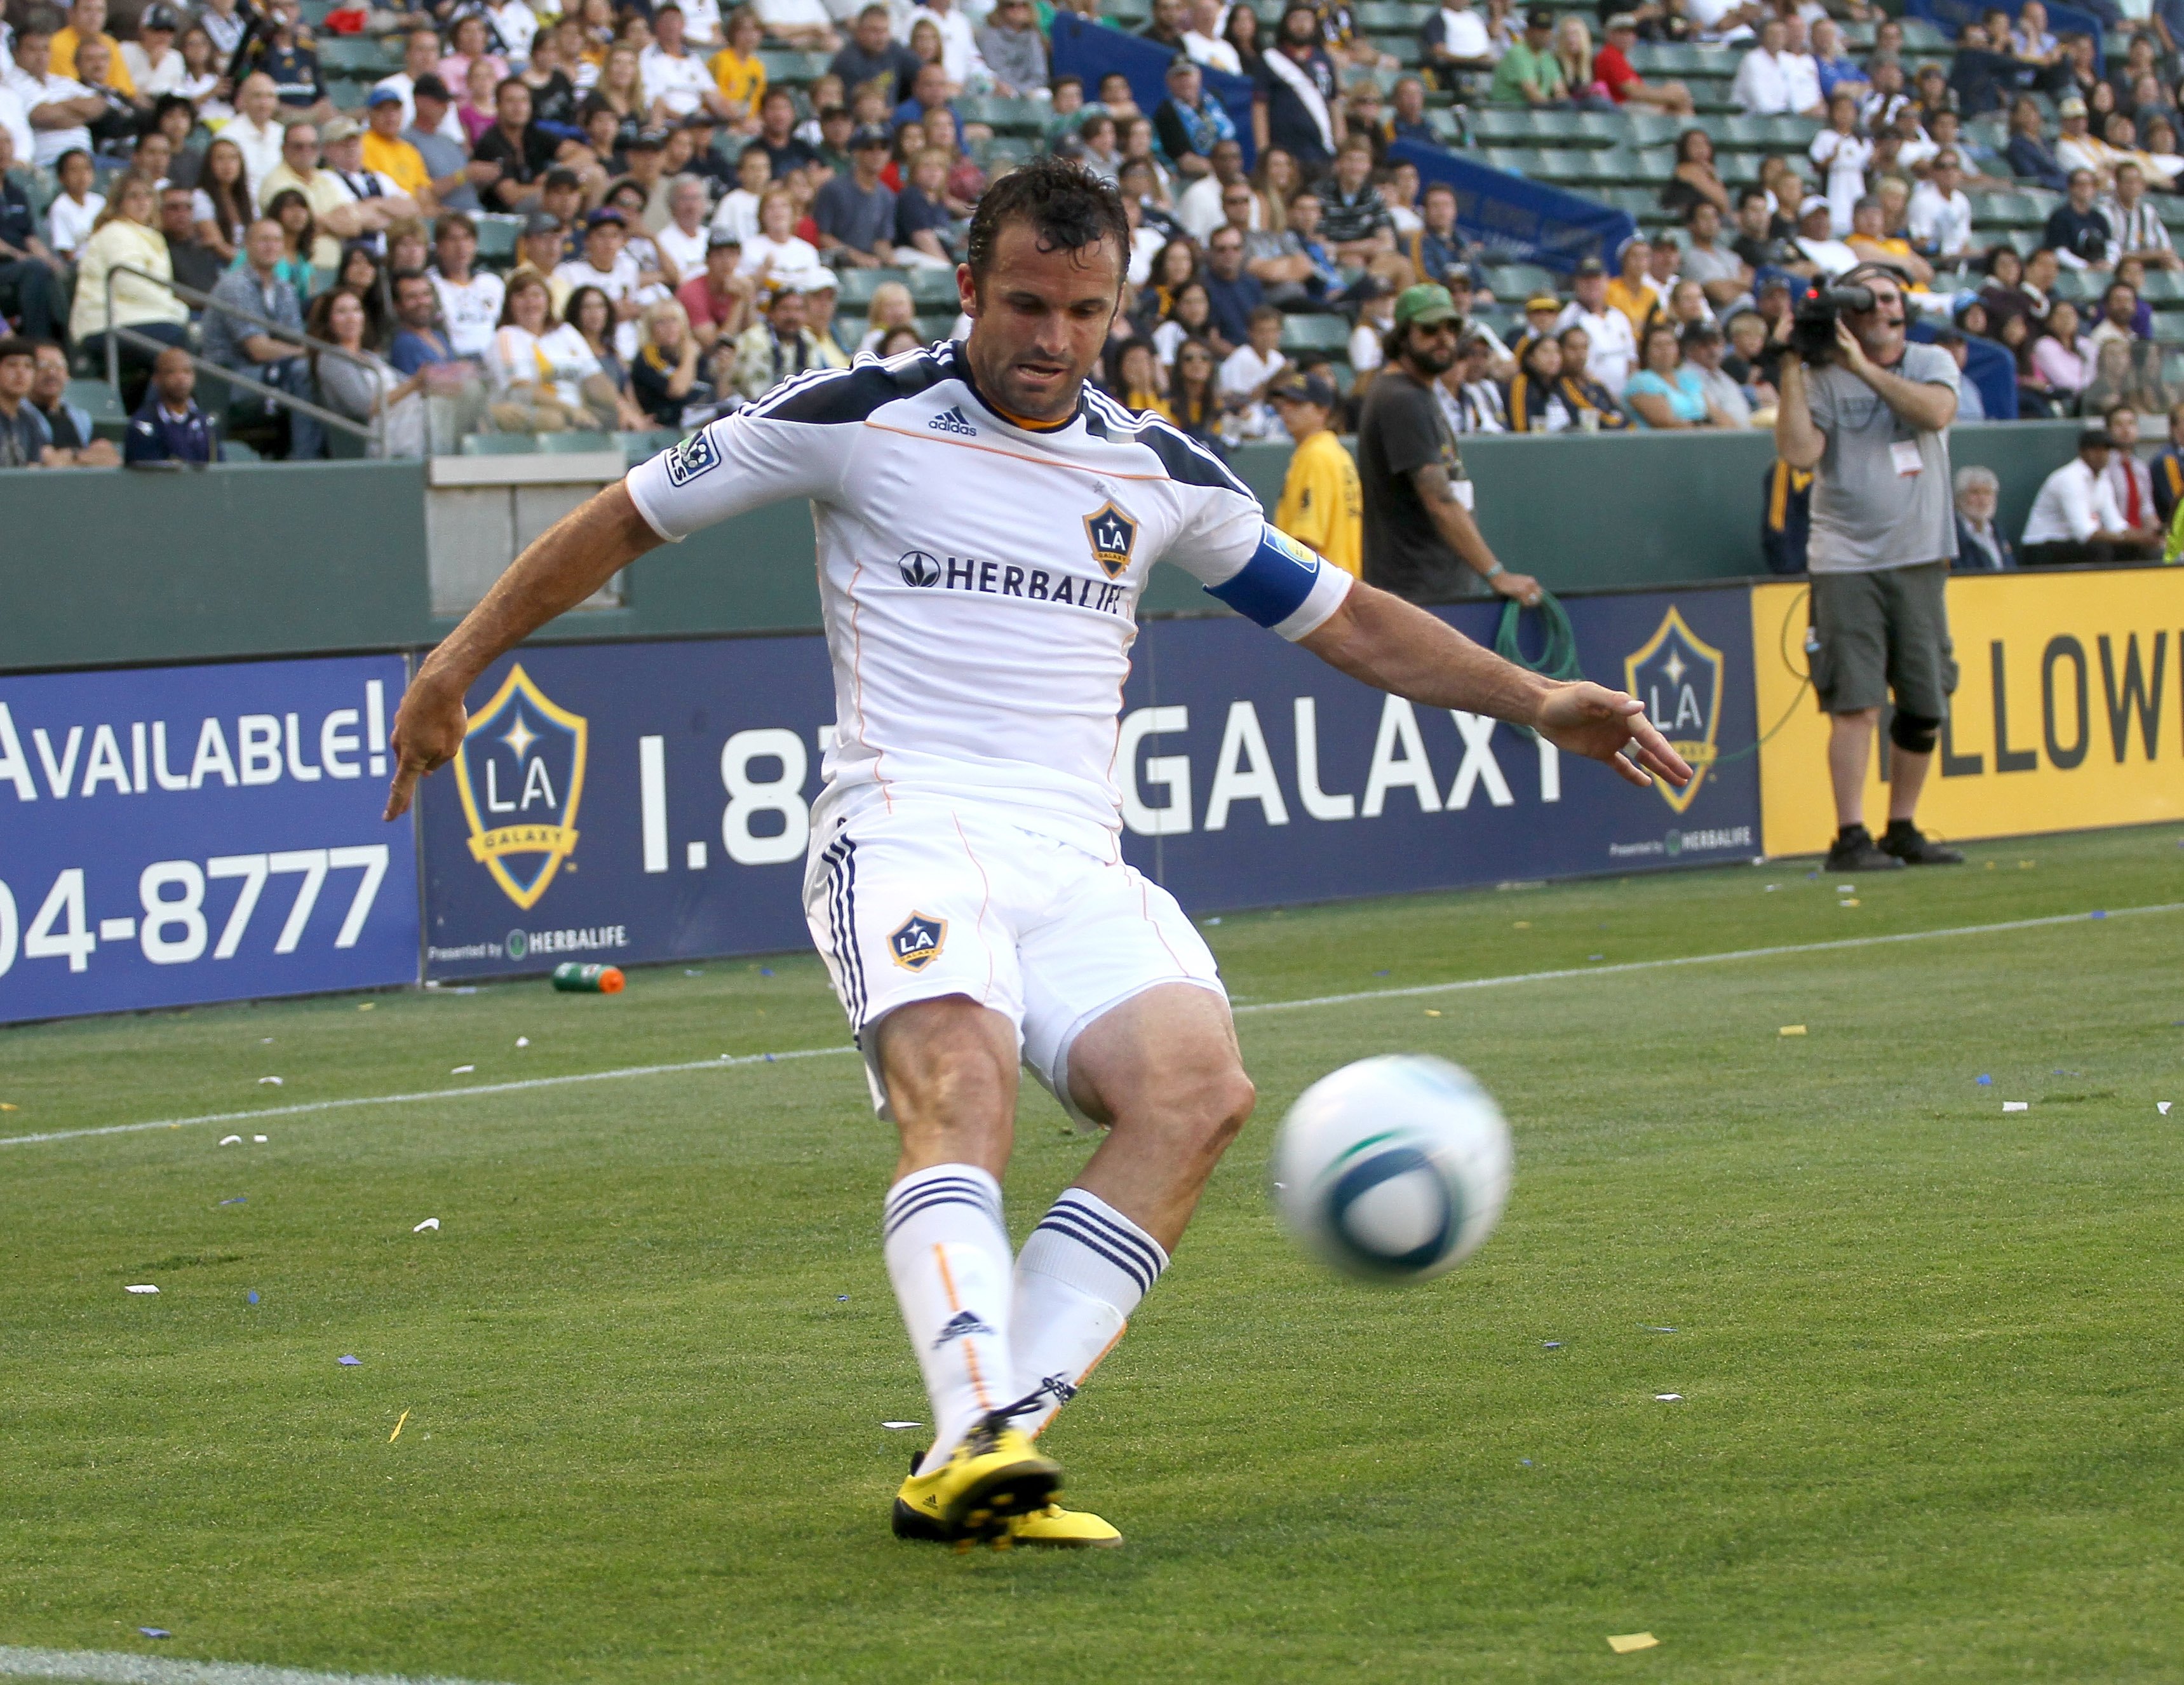 CARSON, CA - JUNE 05:  Chris Klein #7 of the Los Angeles Galaxy centers the ball against the Houston Dynamo on June 5, 2010 at the Home Depot Center in Carson, California. The Galaxy won 4-1.  (Photo by Stephen Dunn/Getty Images)